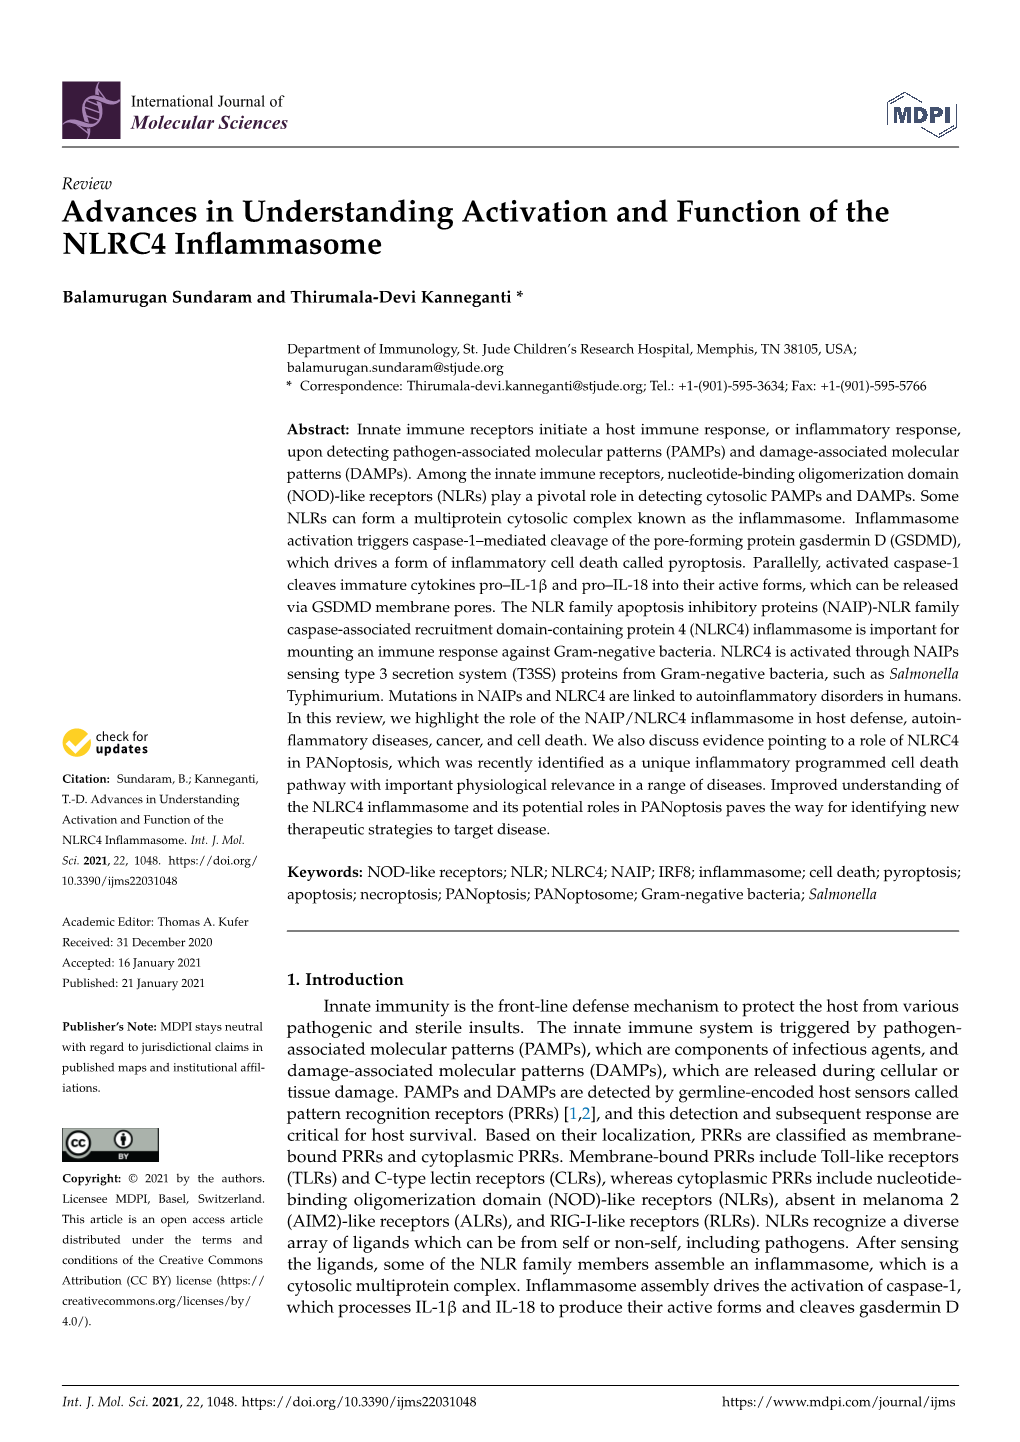 Advances in Understanding Activation and Function of the NLRC4 Inﬂammasome